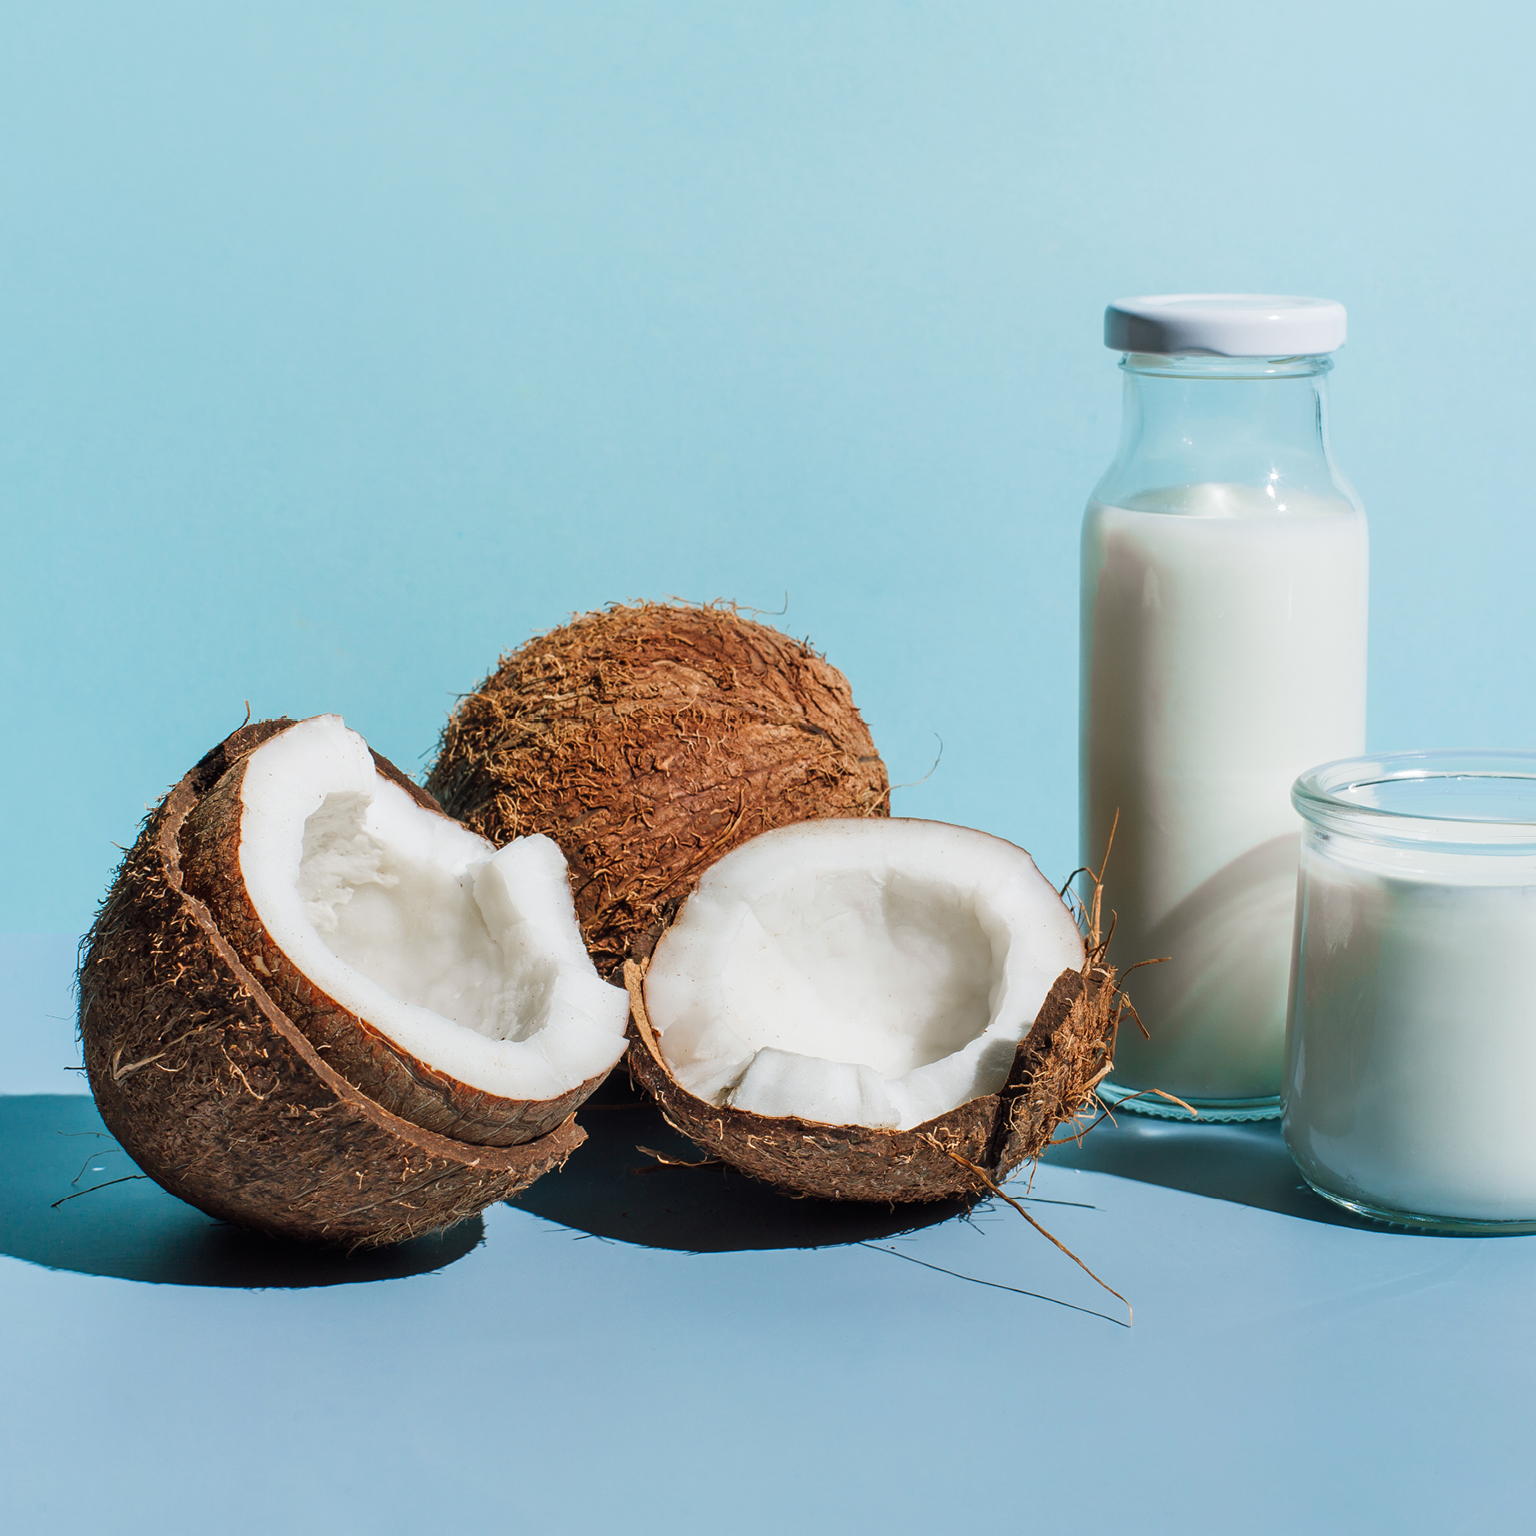 The coconut – a superfood